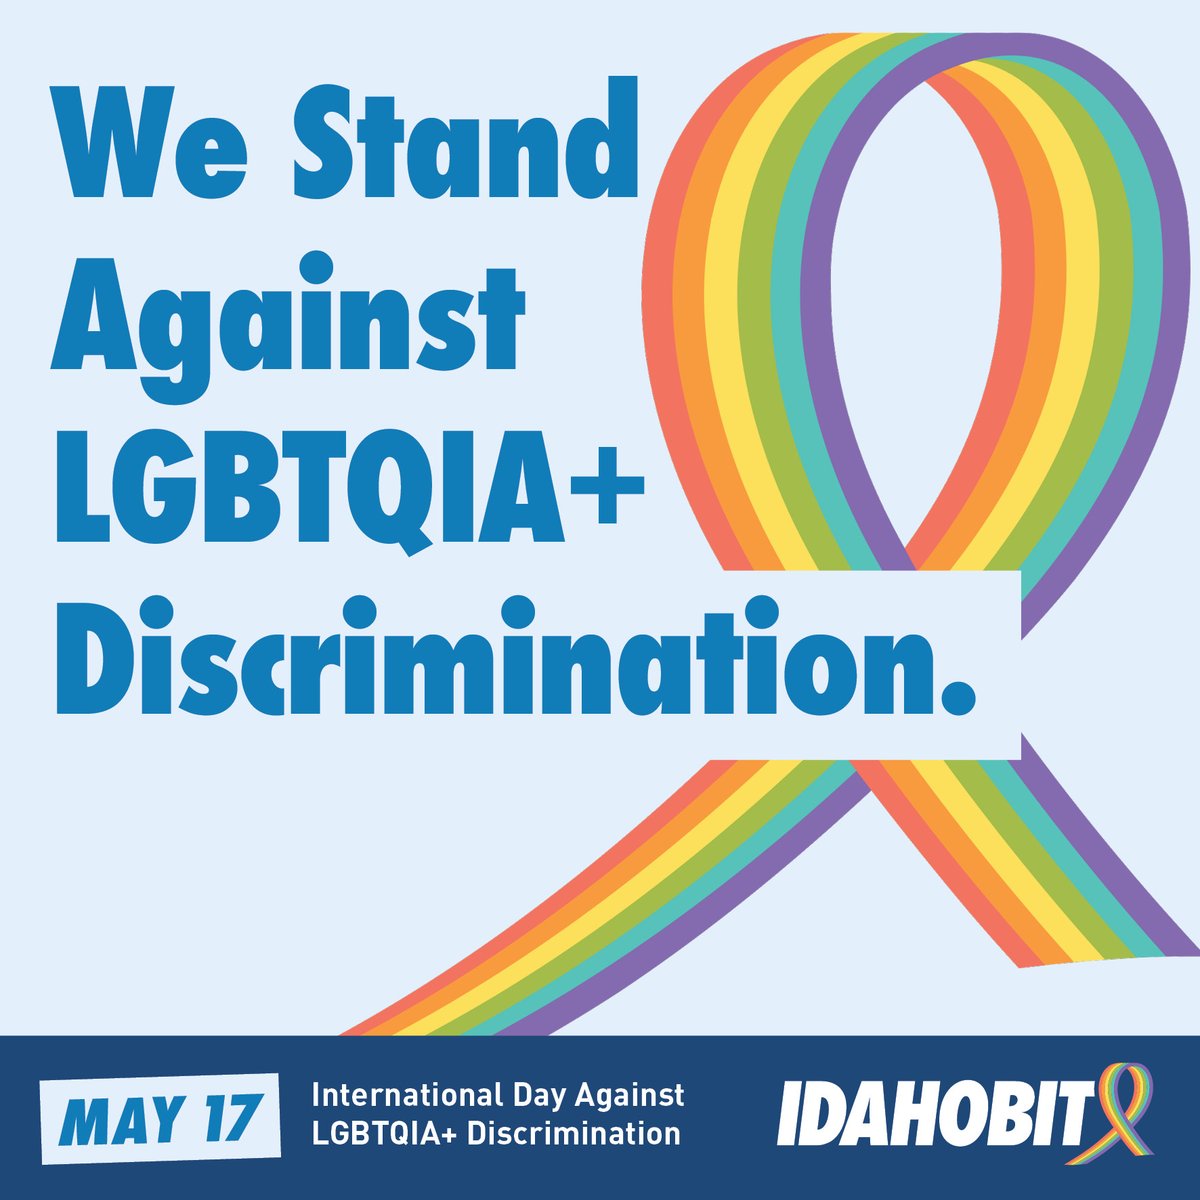 Today is International Day Against Homophobia, Biphobia and Transphobia. The theme is “No one left behind: equality, freedom and justice for all' and encourages unity: only through solidarity for each other will we create a world without injustice, where no one is left behind.